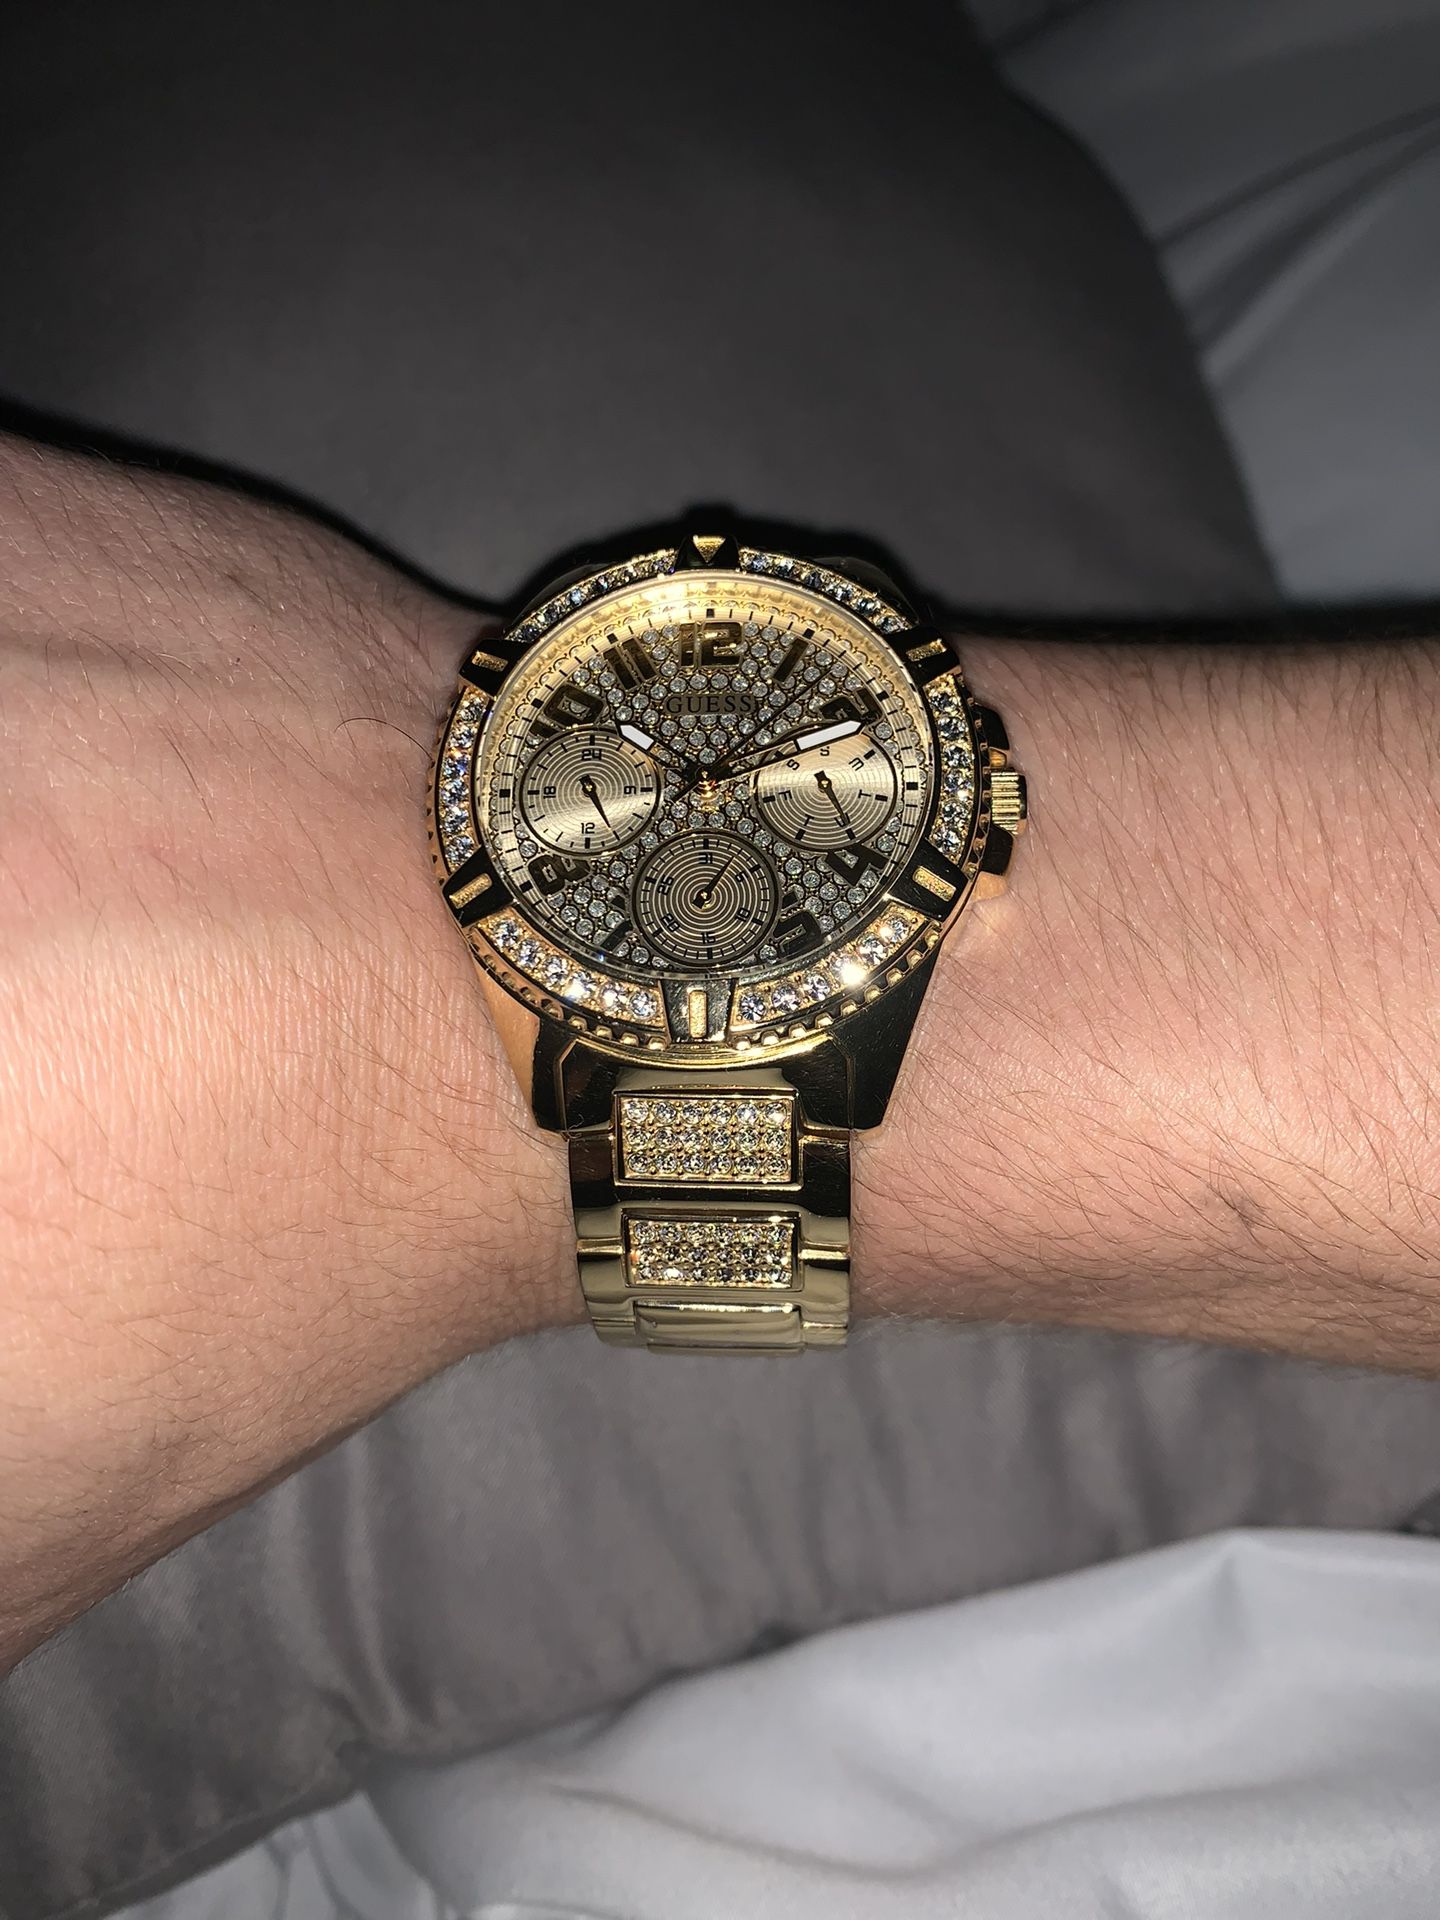 Gold Guess Watch for Sale in Rockwall, TX - OfferUp